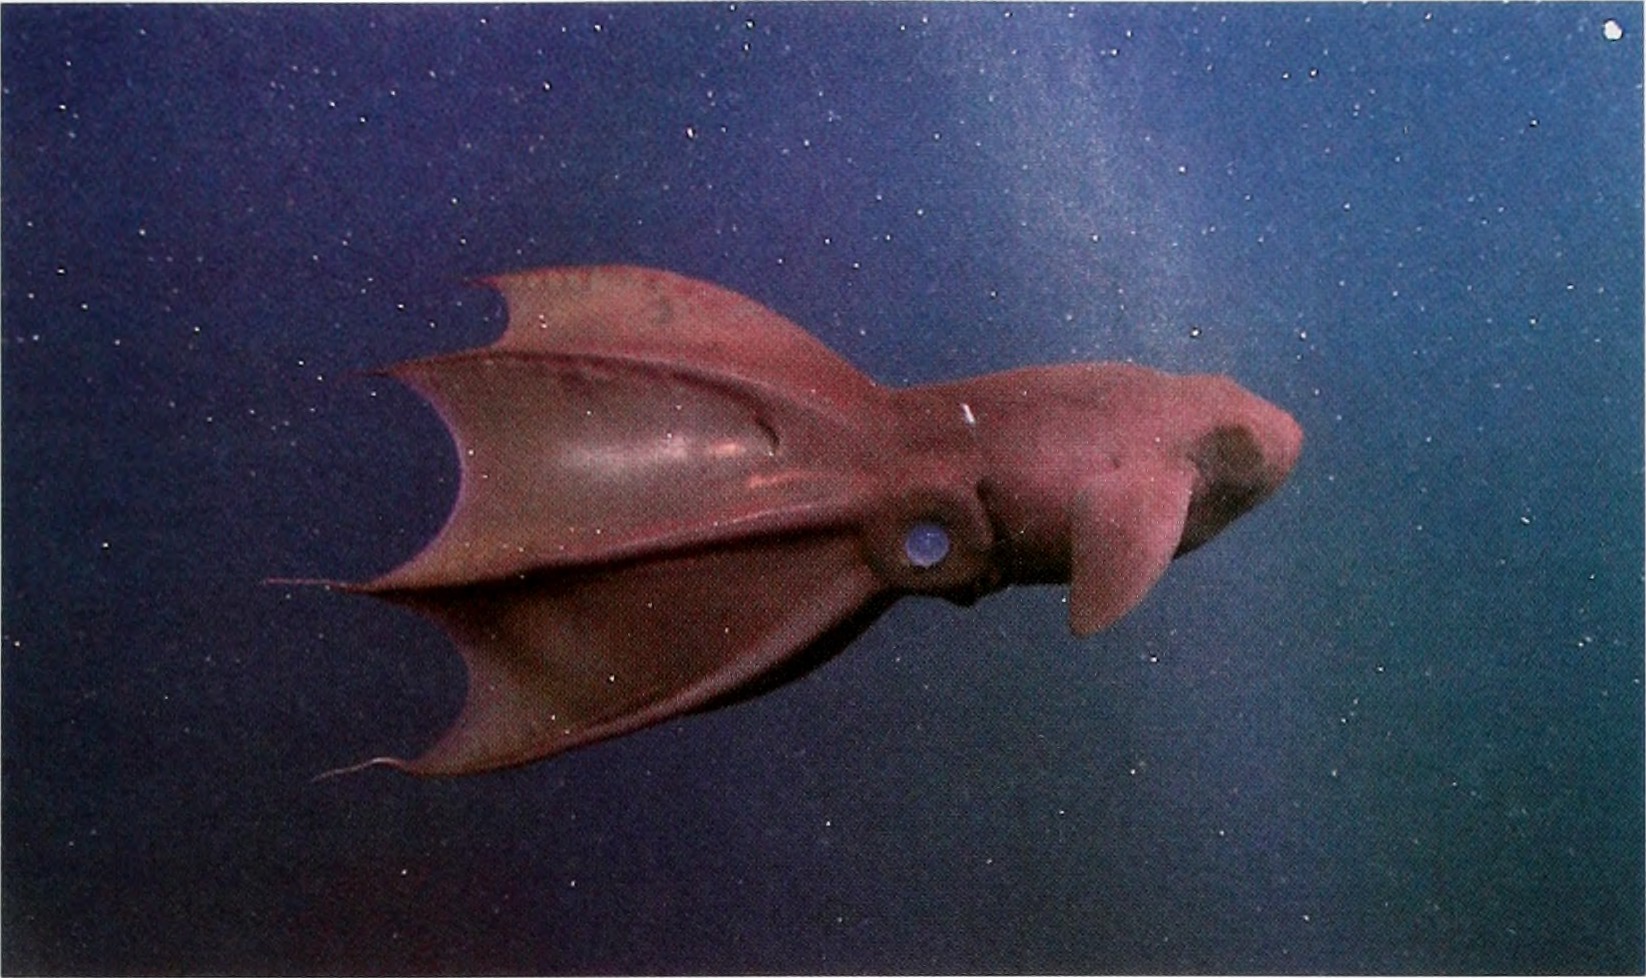 Vampyroteuthis_infernalis_Image_from_page_230_of__The_Biological_bulletin_.jpg